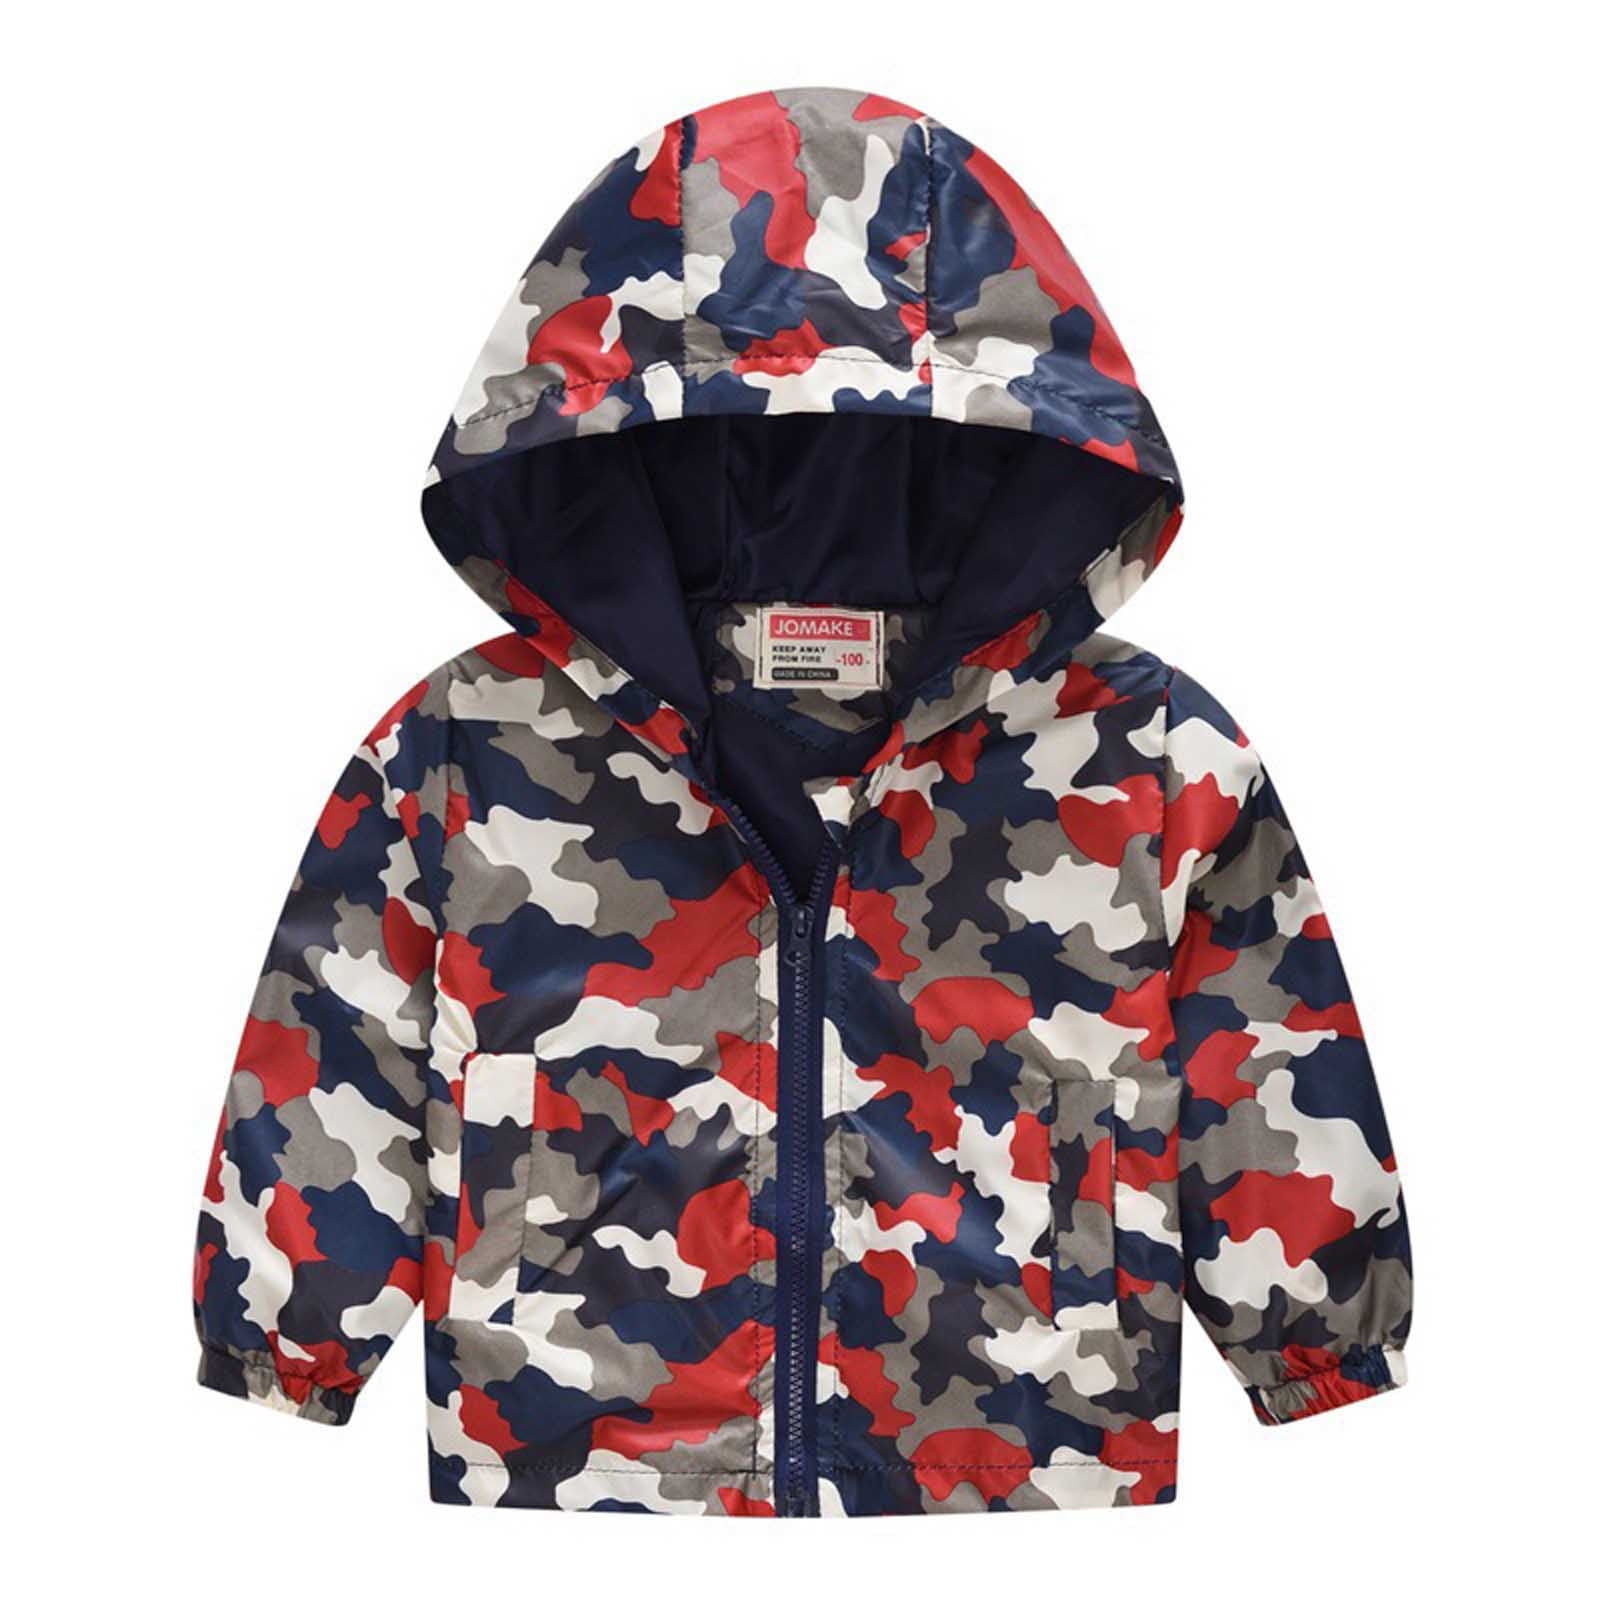 gakvbuo Clearance Items All 2022!Winter Coats For Kids With Hooded